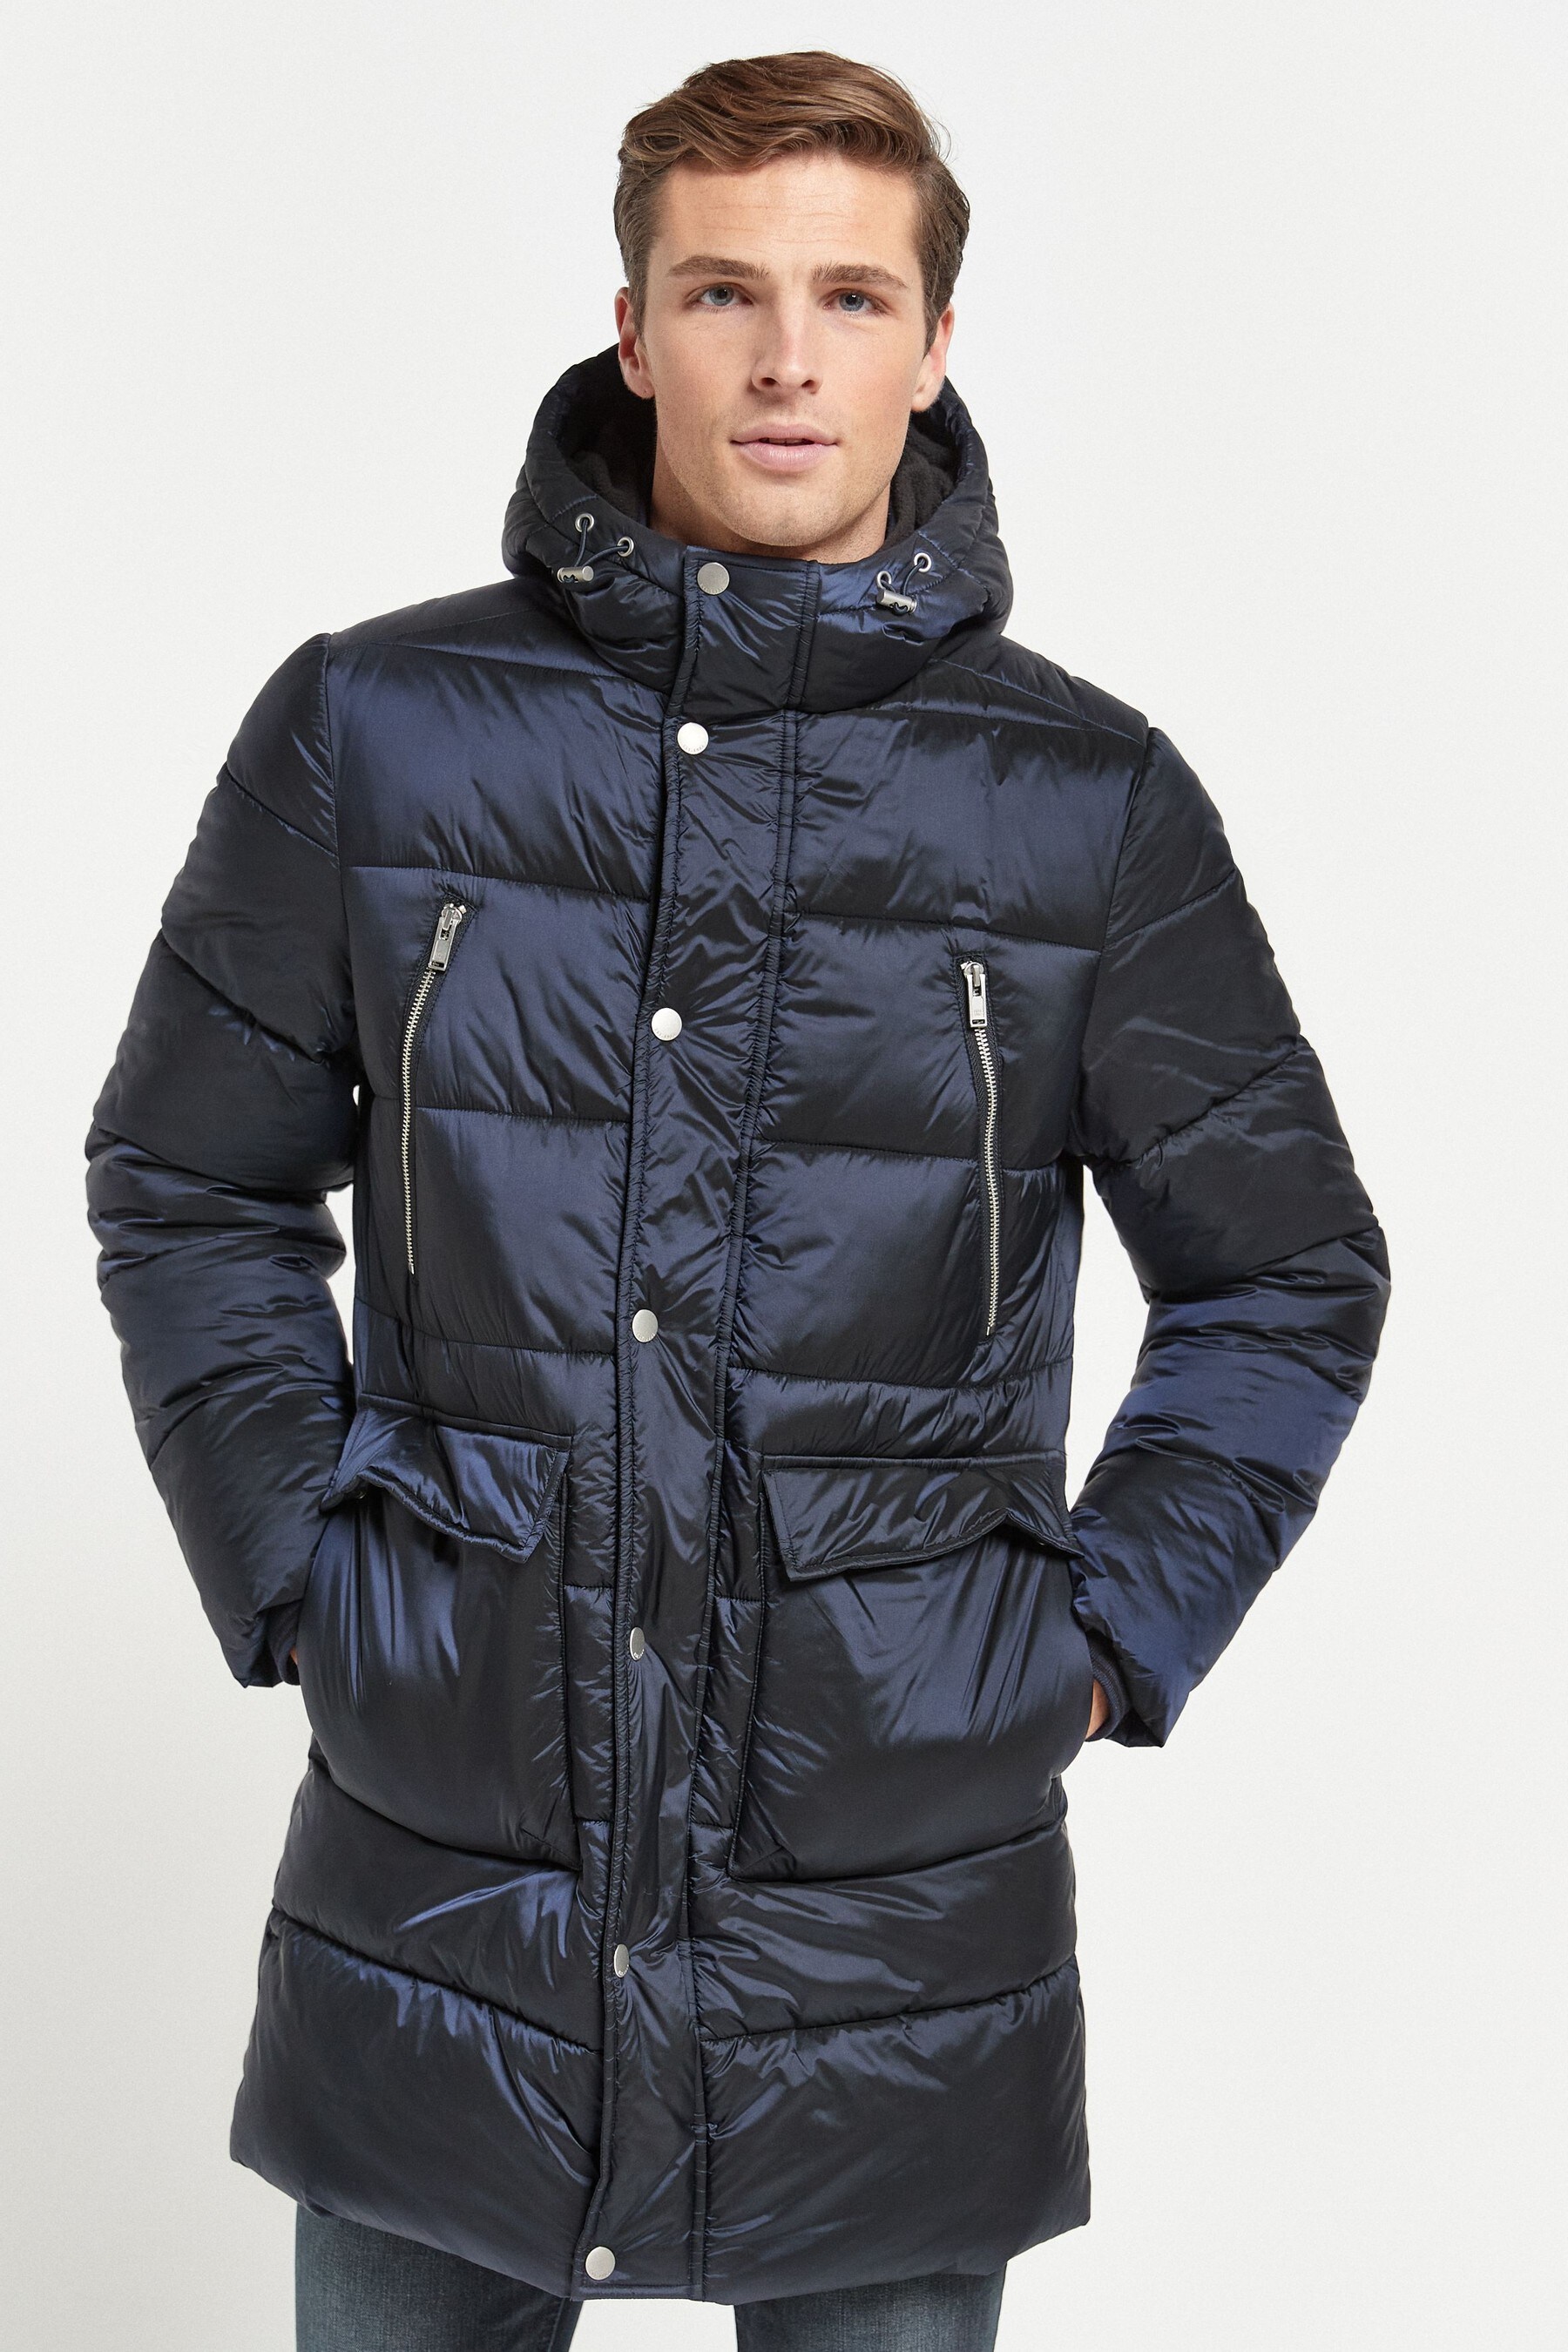 Buy Shower Resistant Longline Puffer Jacket from the Next UK online shop